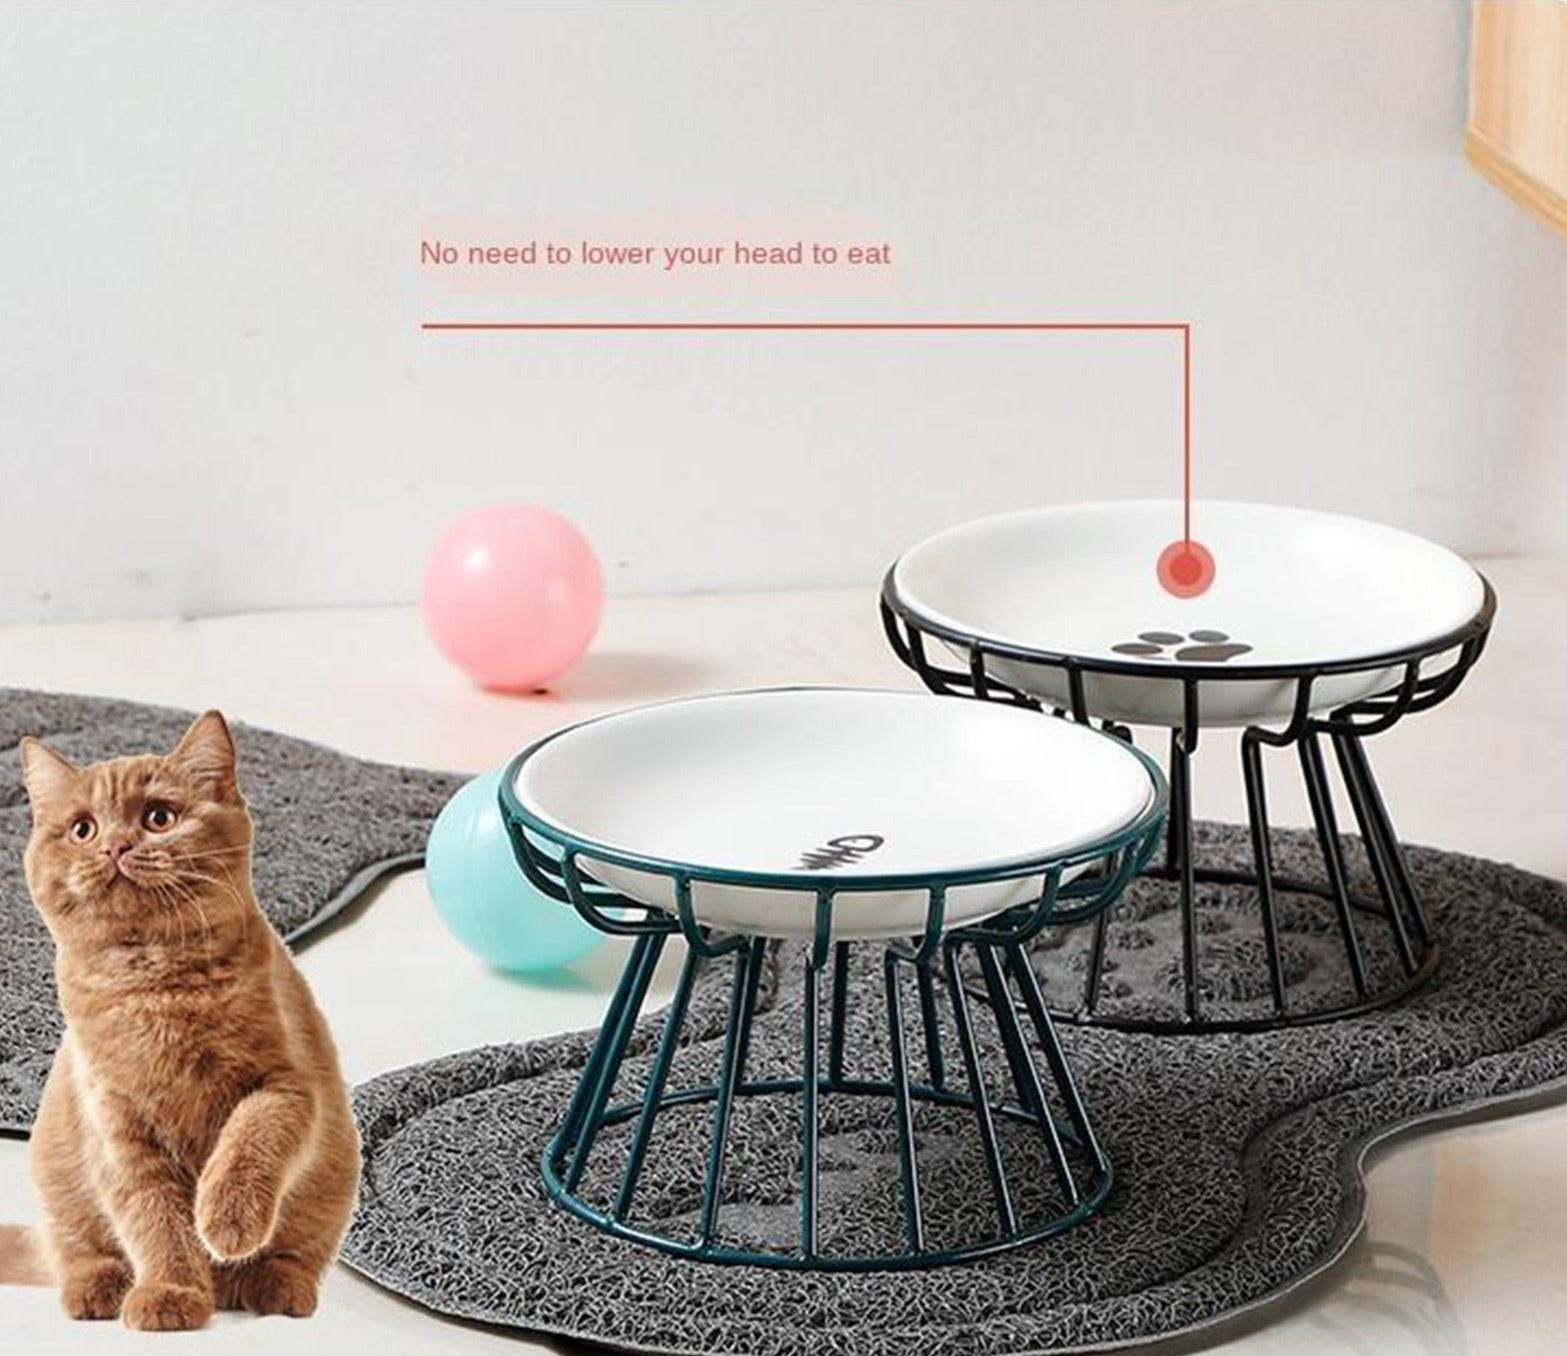 💲ONE DAY 70% OFF🥣Whisker-Friendly Anti-Vomit Cat Plate🔥Buy 2 Get Free Shipping